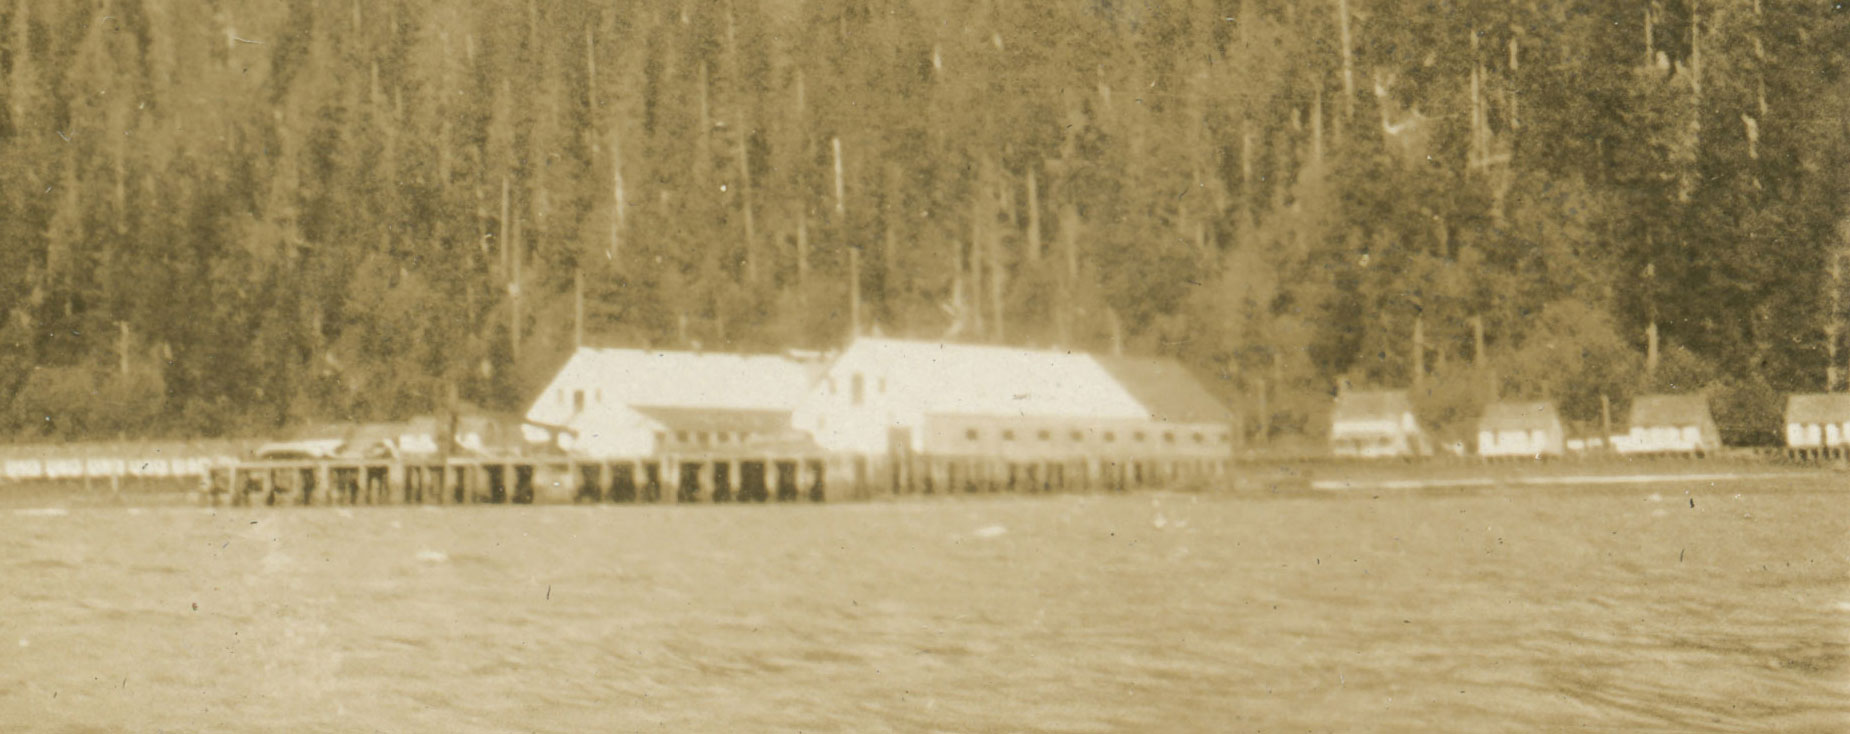 Main cannery building and docks in the distance with the Skeena River in the foreground.